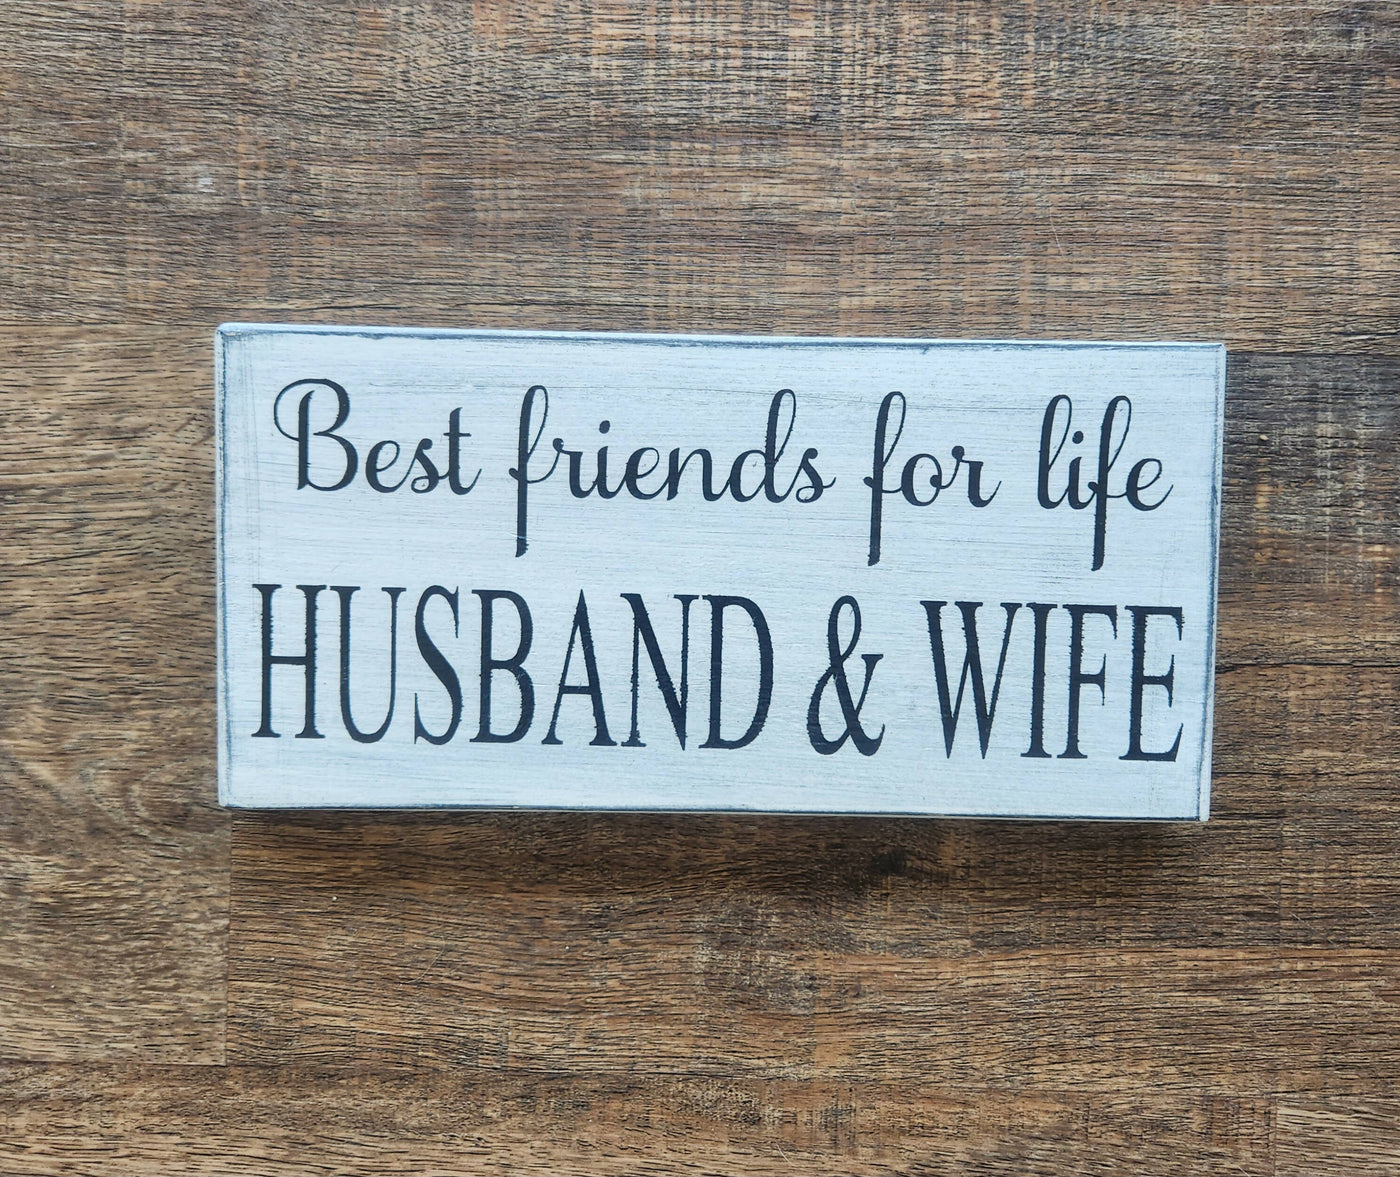 Best friends for life Sign